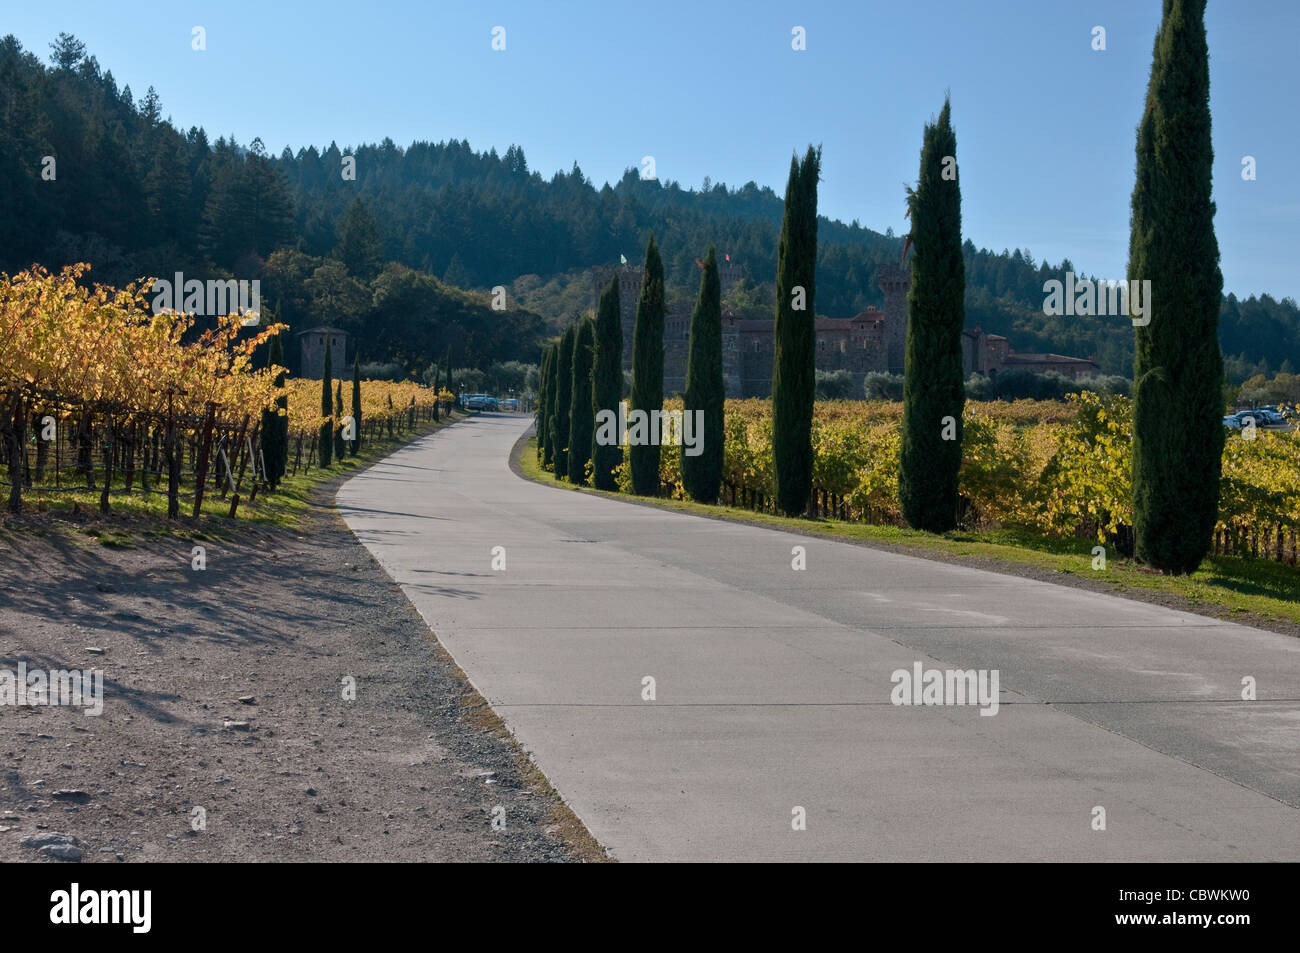 Driveway to Castello di Amorosa an Italian style castle winery in the northern part of Napa Valley, in California Stock Photo